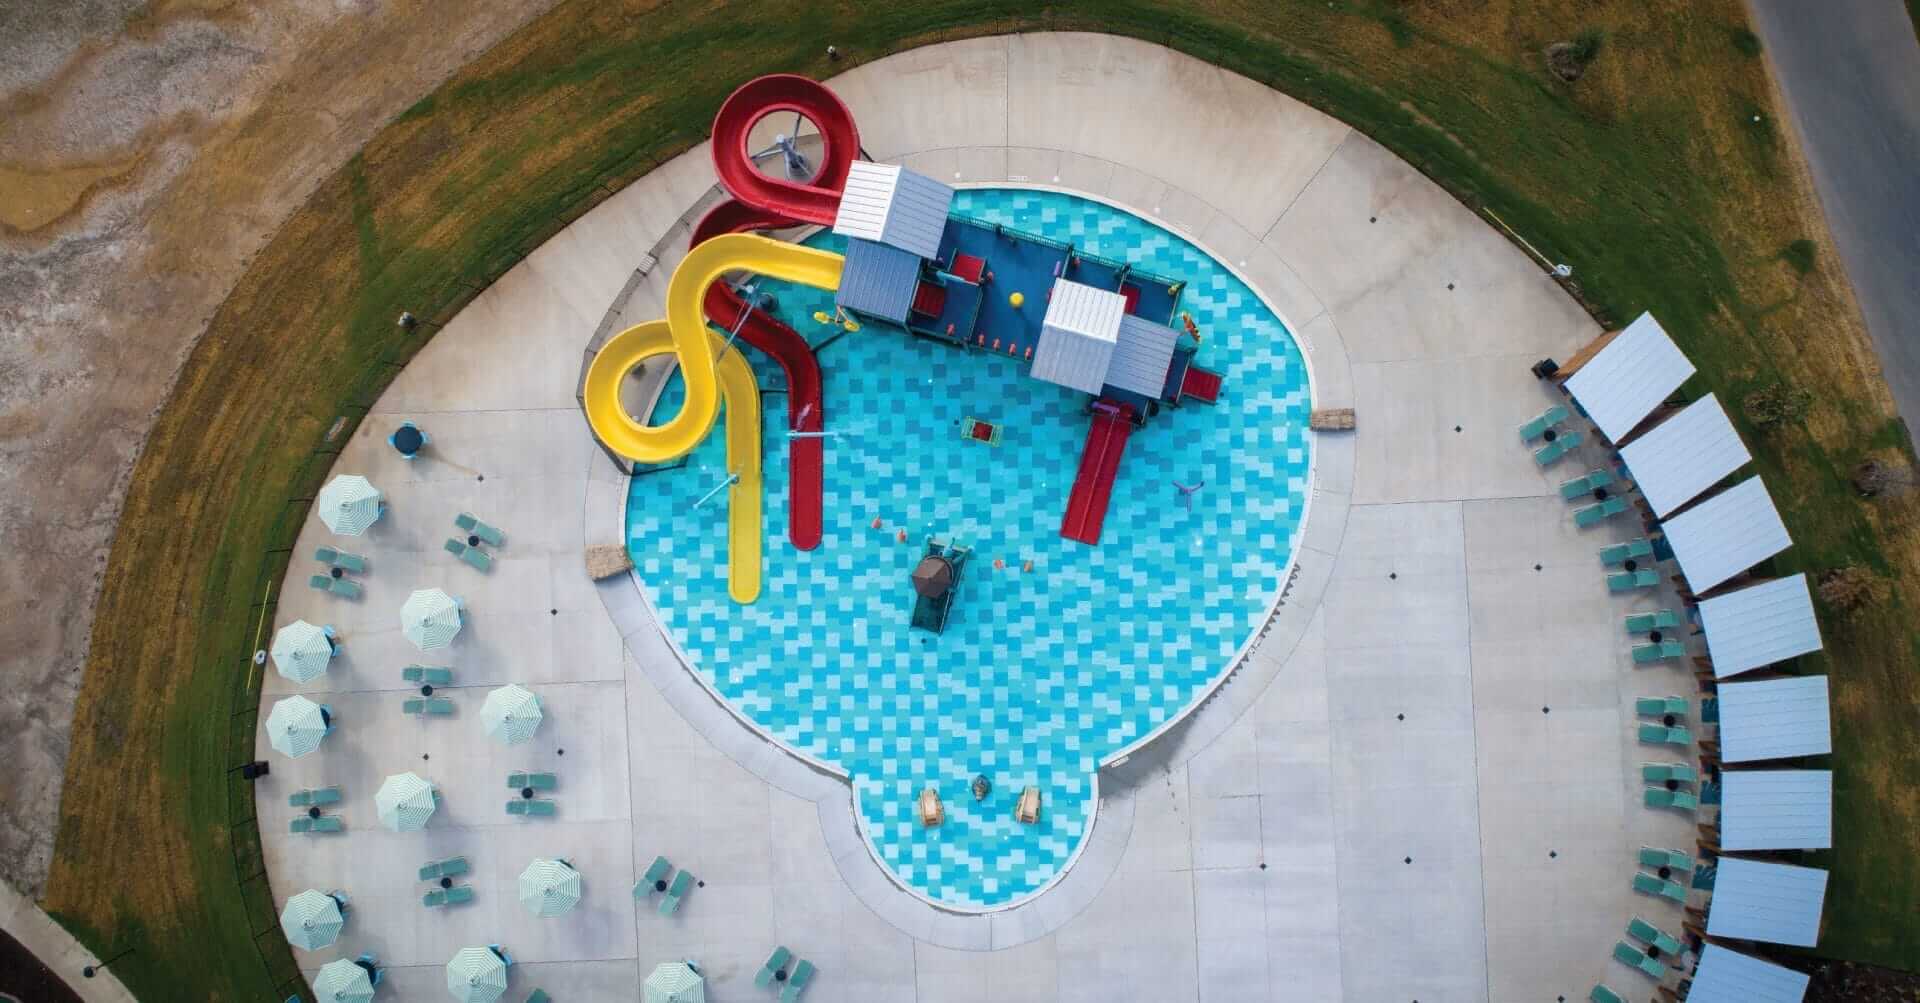 Arial overhead view of the aquatic play unit by Interactive Play installed at the Camp Fimfo in Waco, Texas.